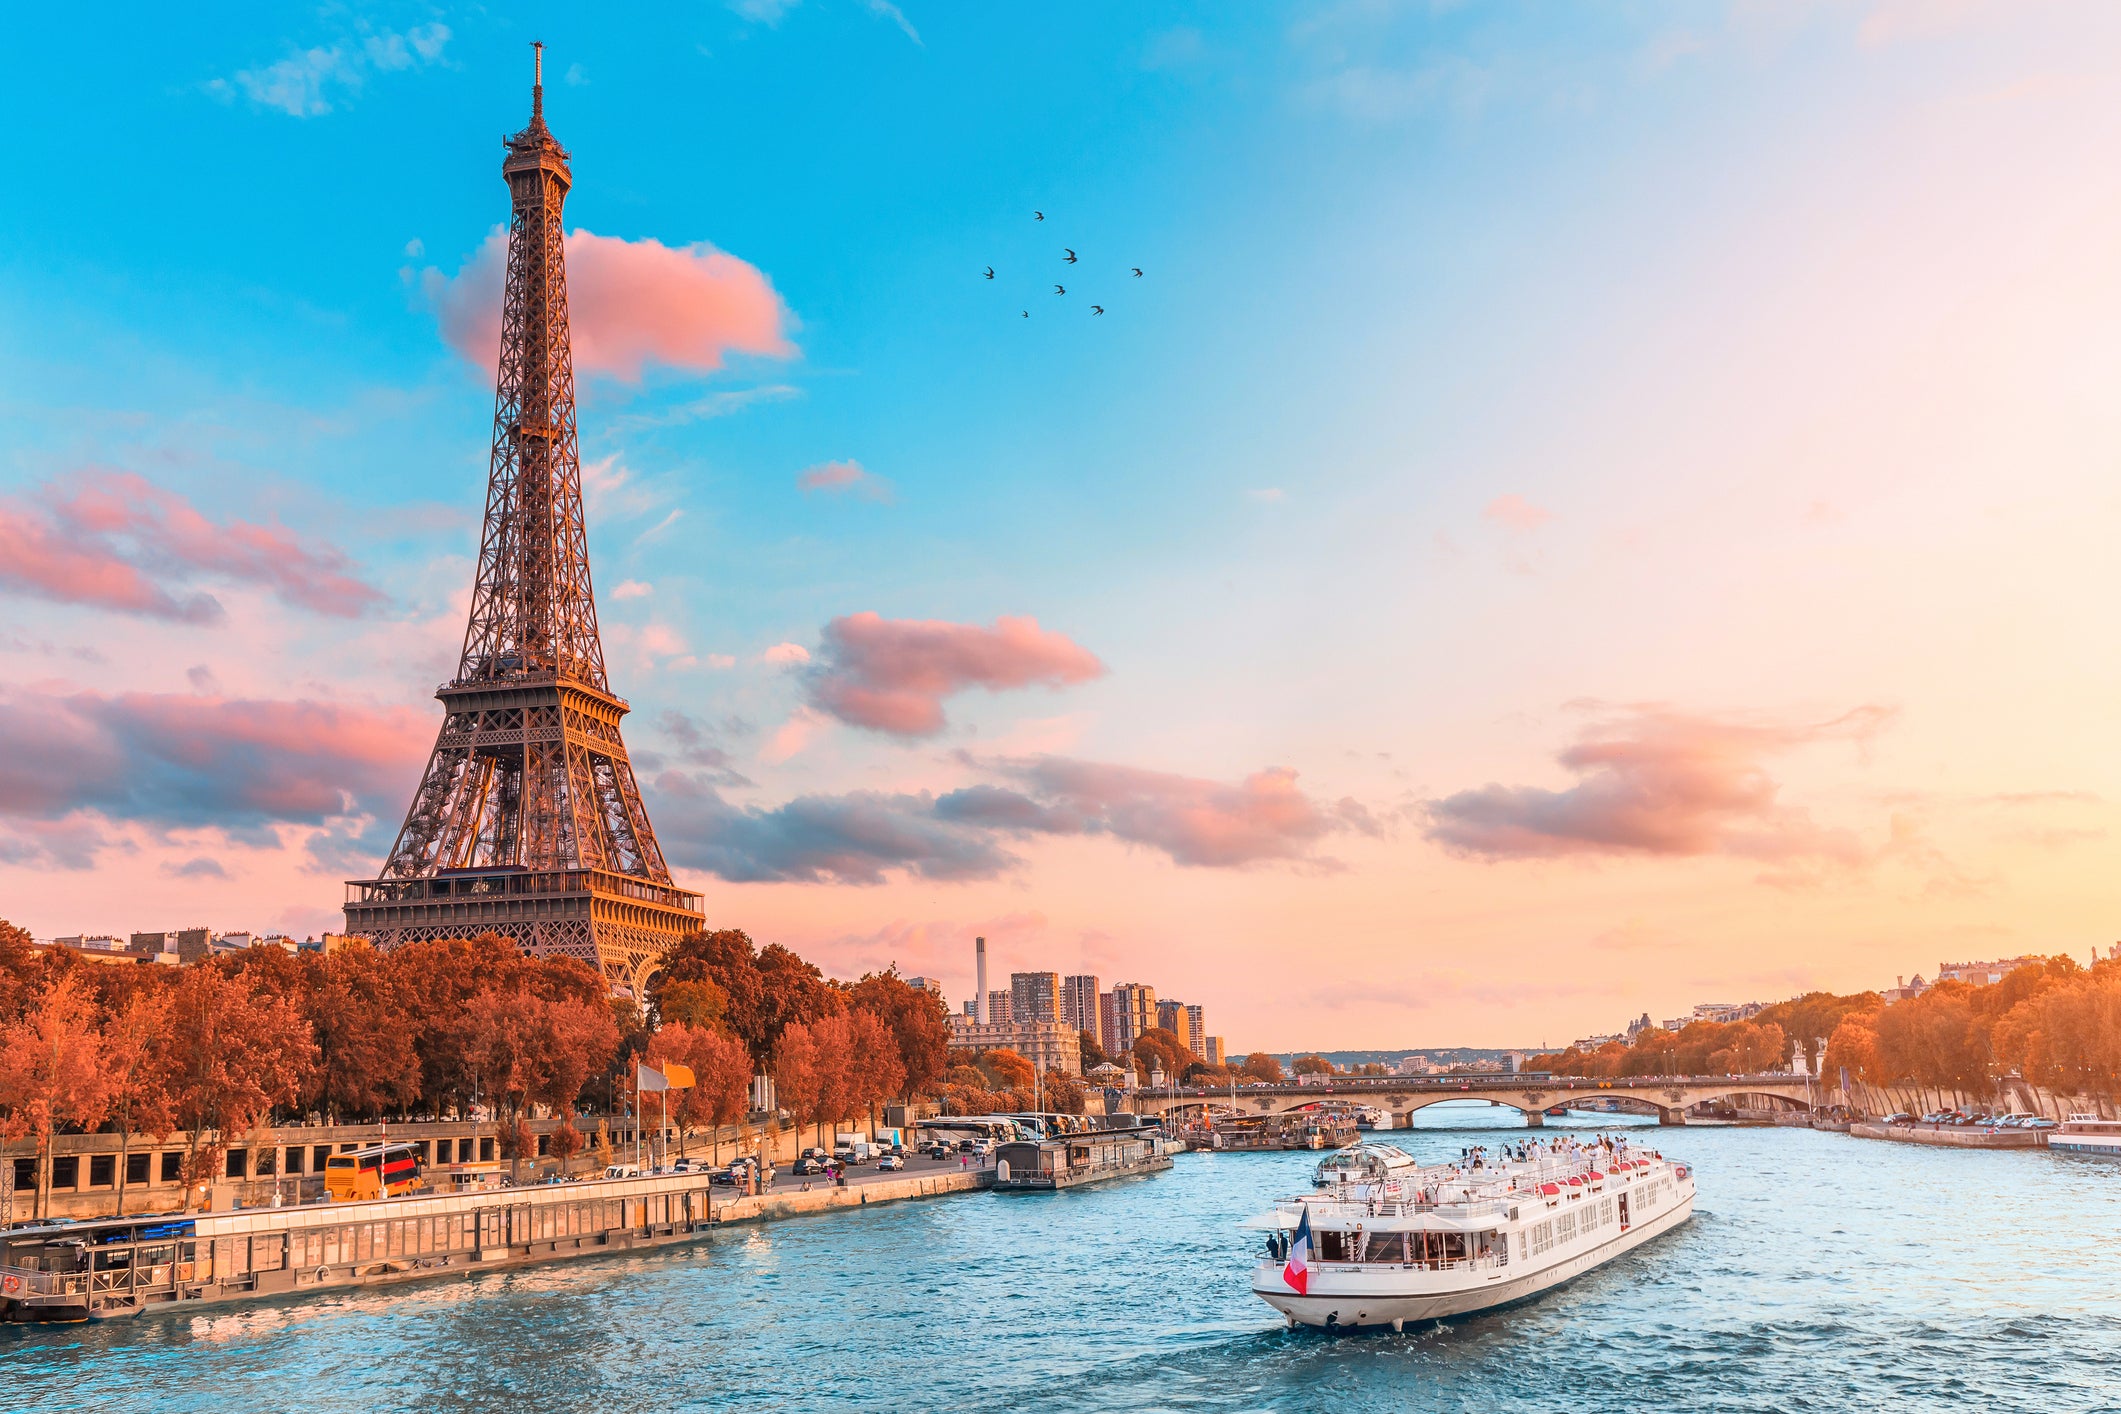 France is the leading destination for international tourism